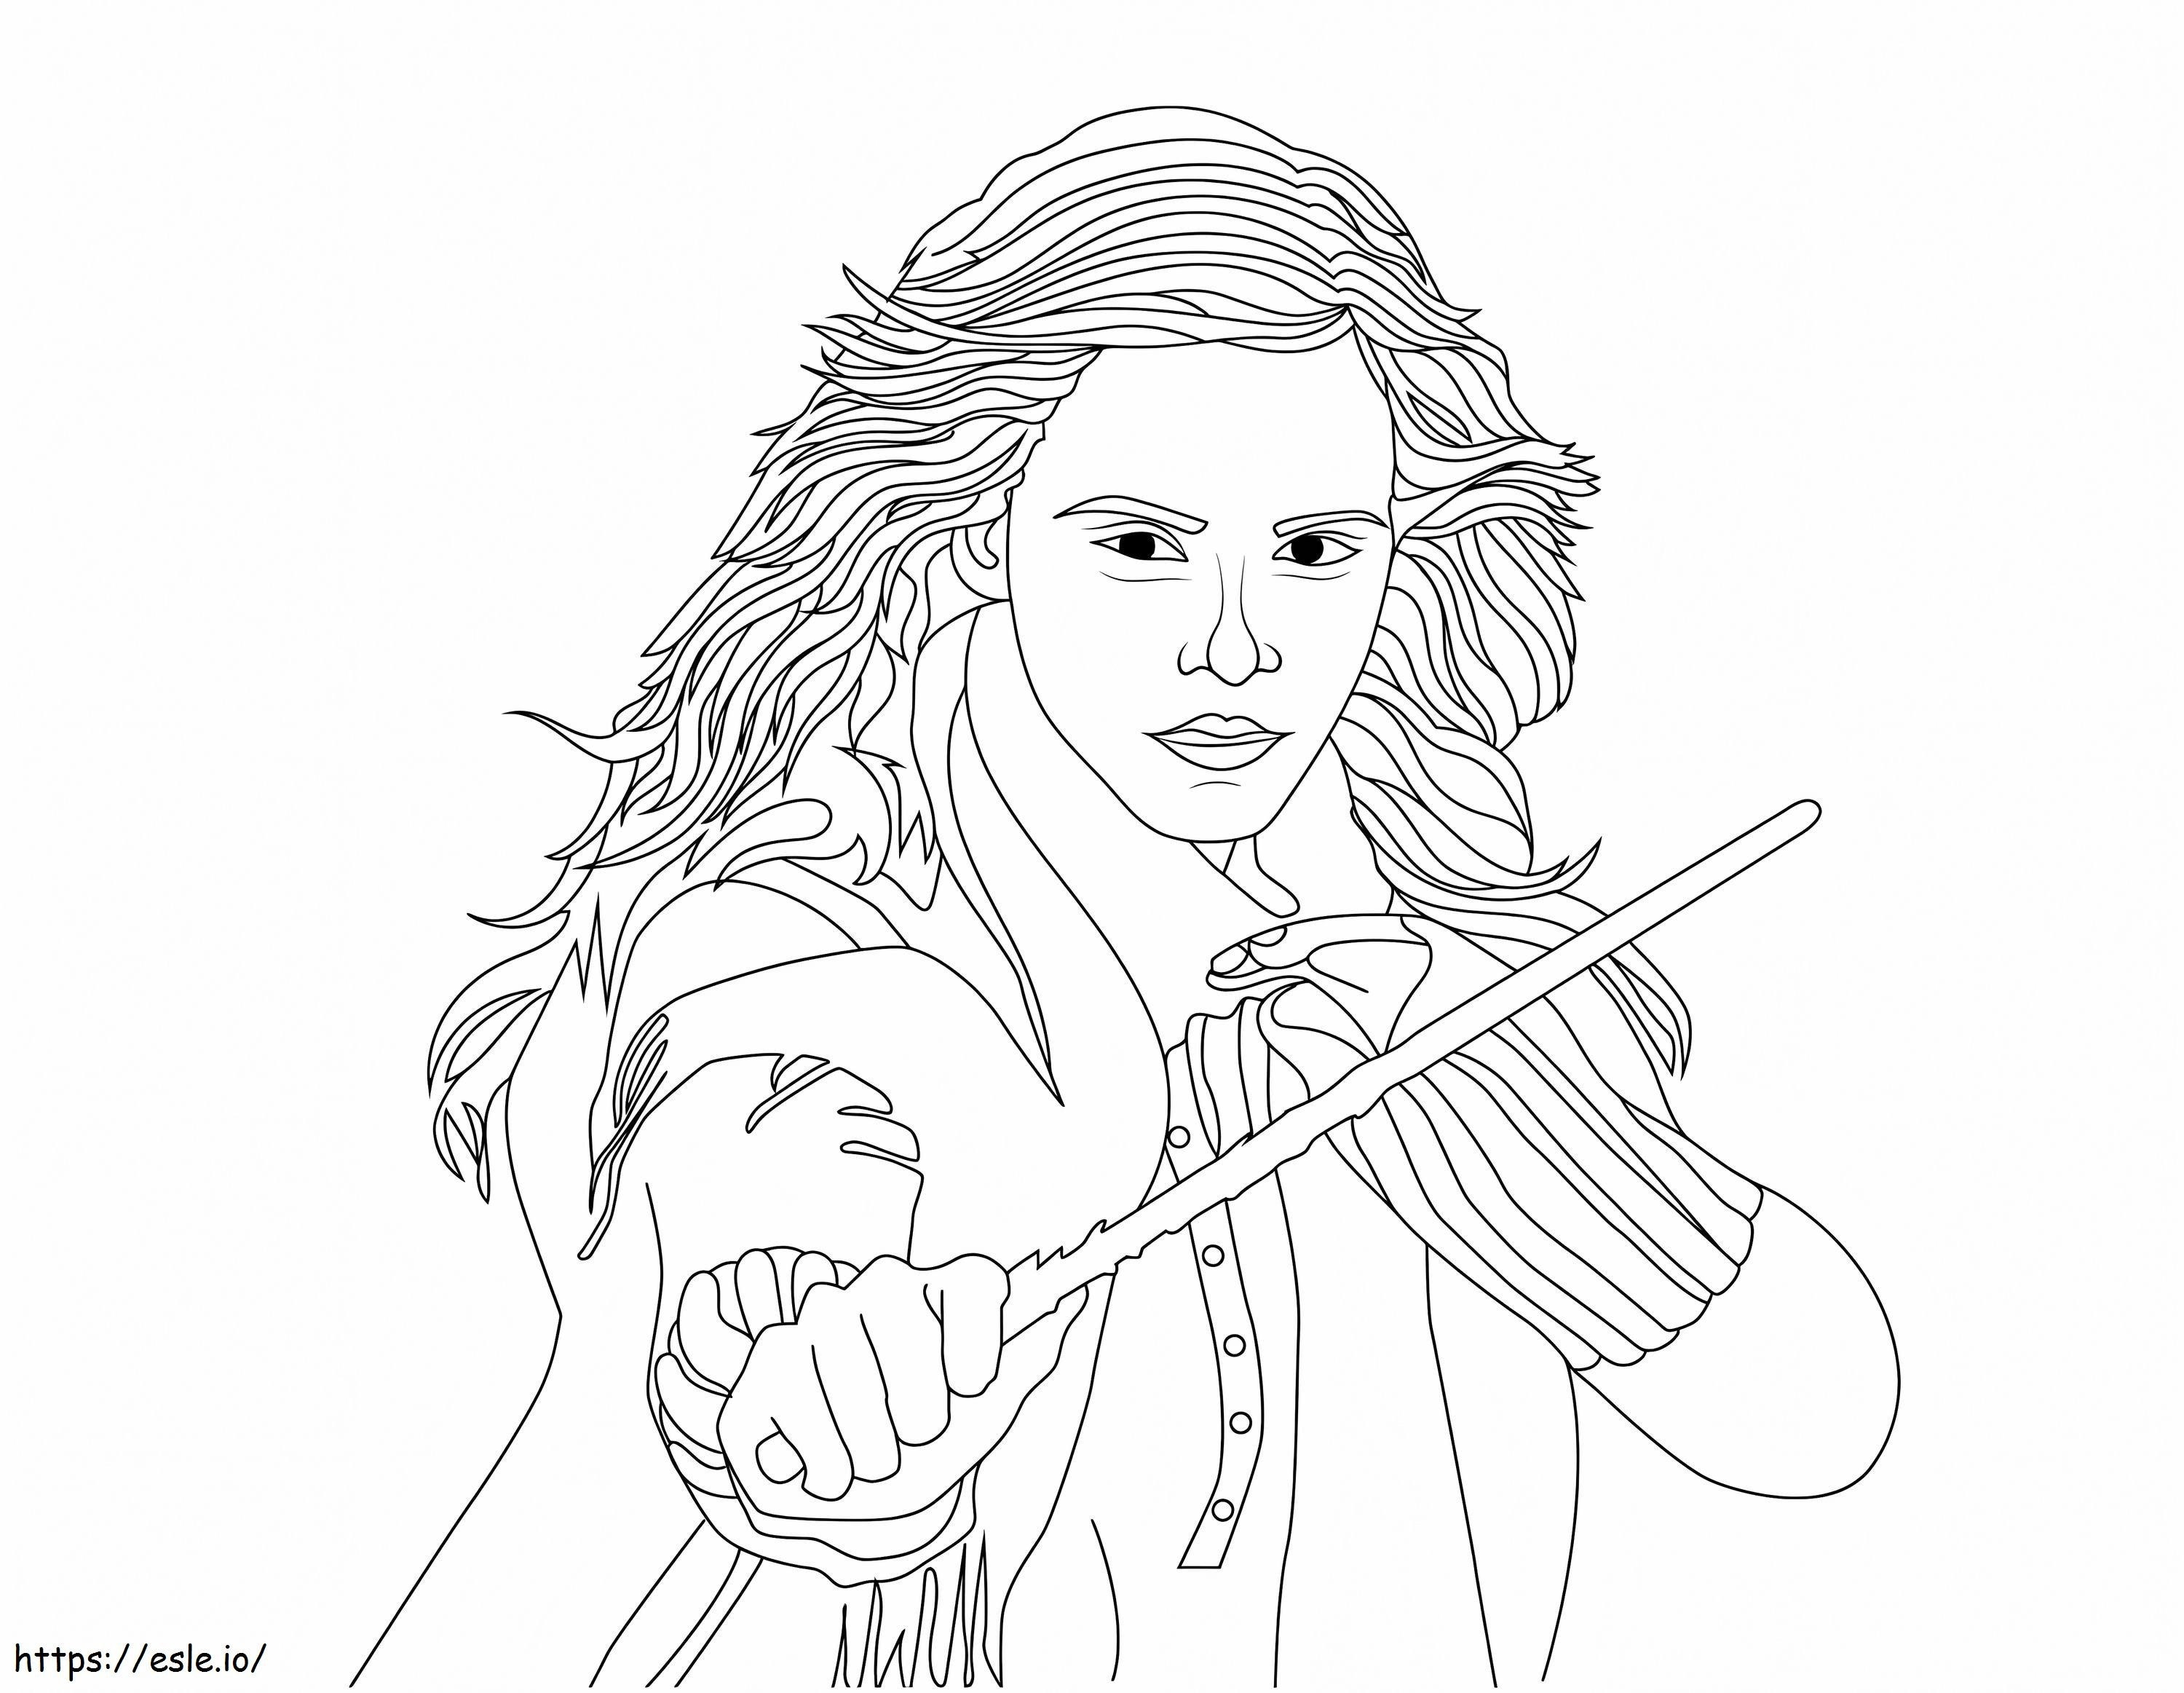 Hermione Granger Fighting coloring page